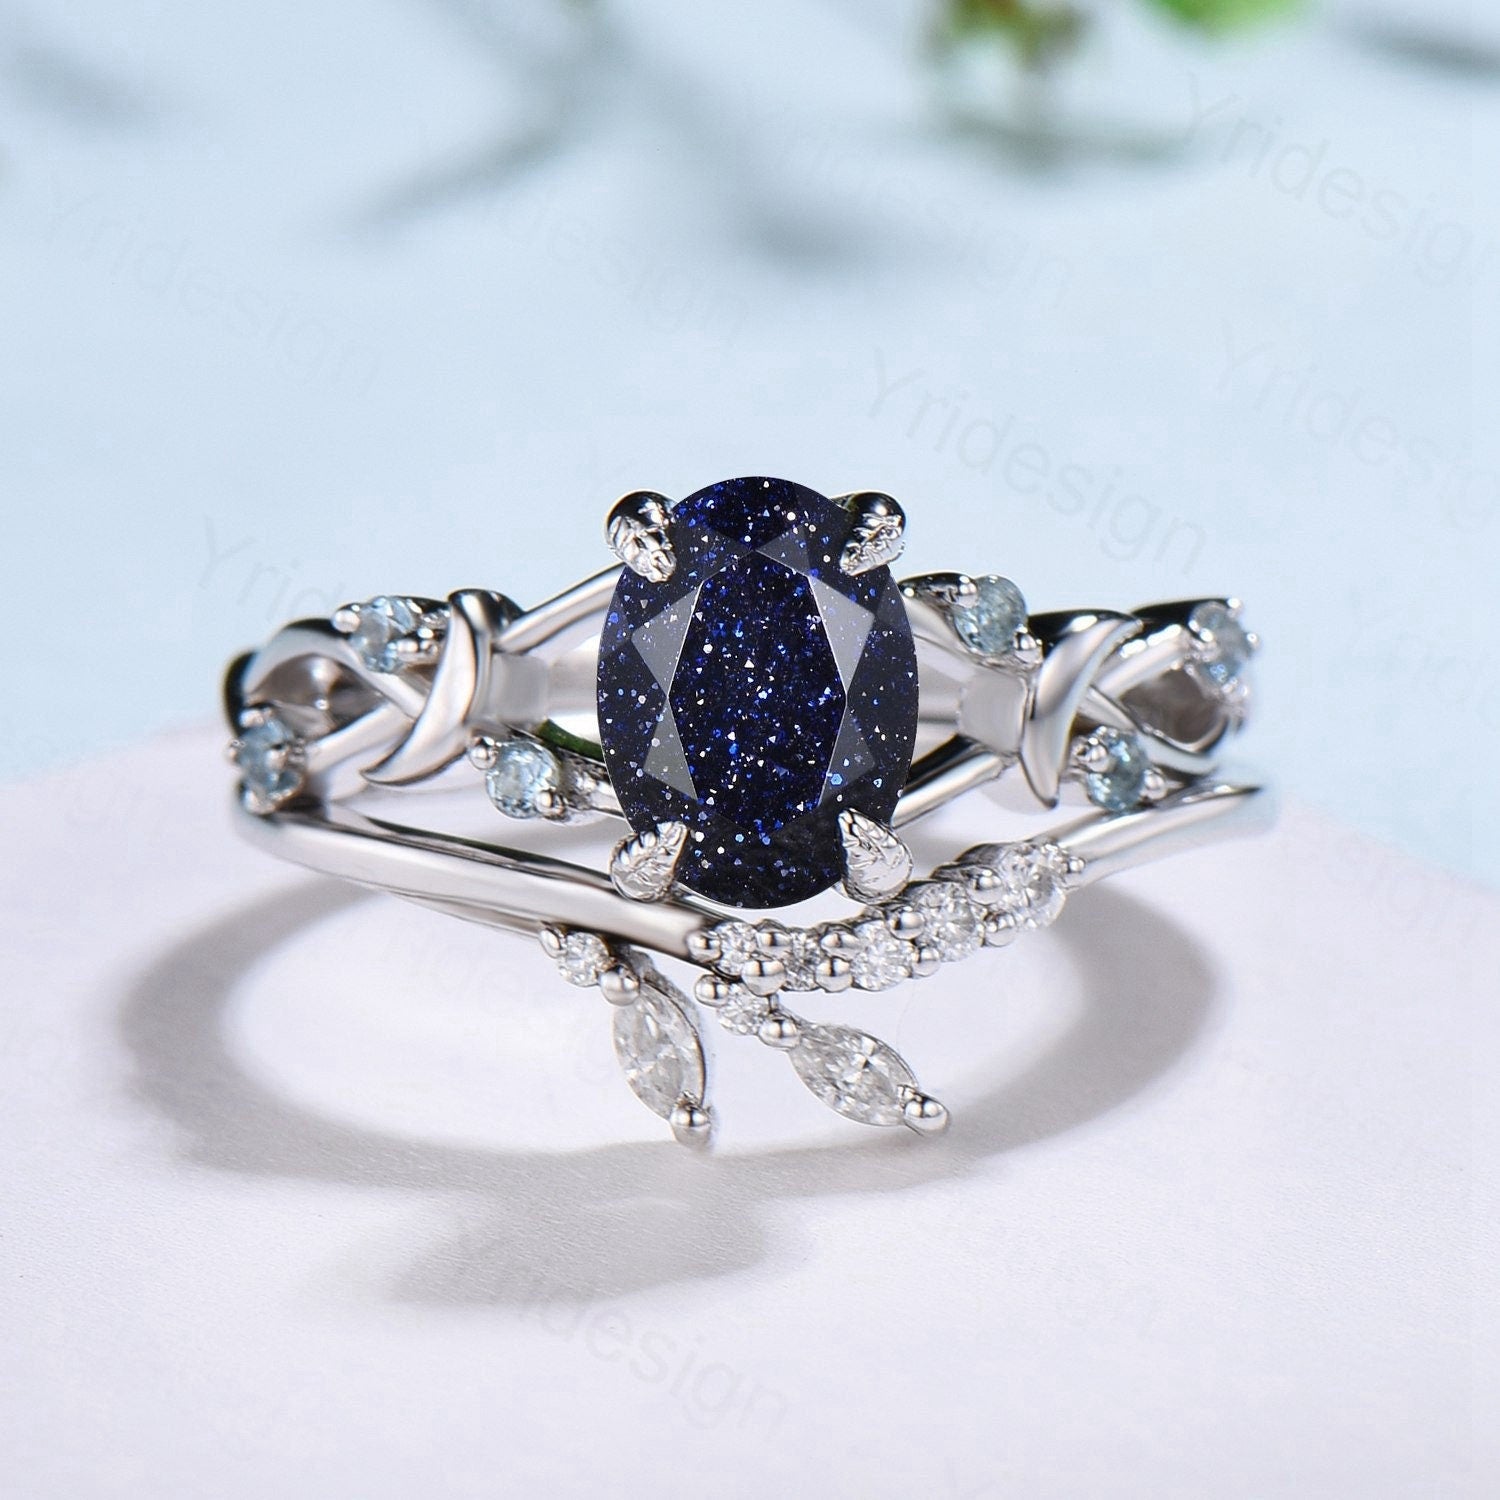 1.5CT Oval Galaxy Blue Sandstone Engagement Ring Set Twig Swiss Topaz Wedding Ring Set FOR Women Unique Branch Bridal Set Personalized Gift - PENFINE